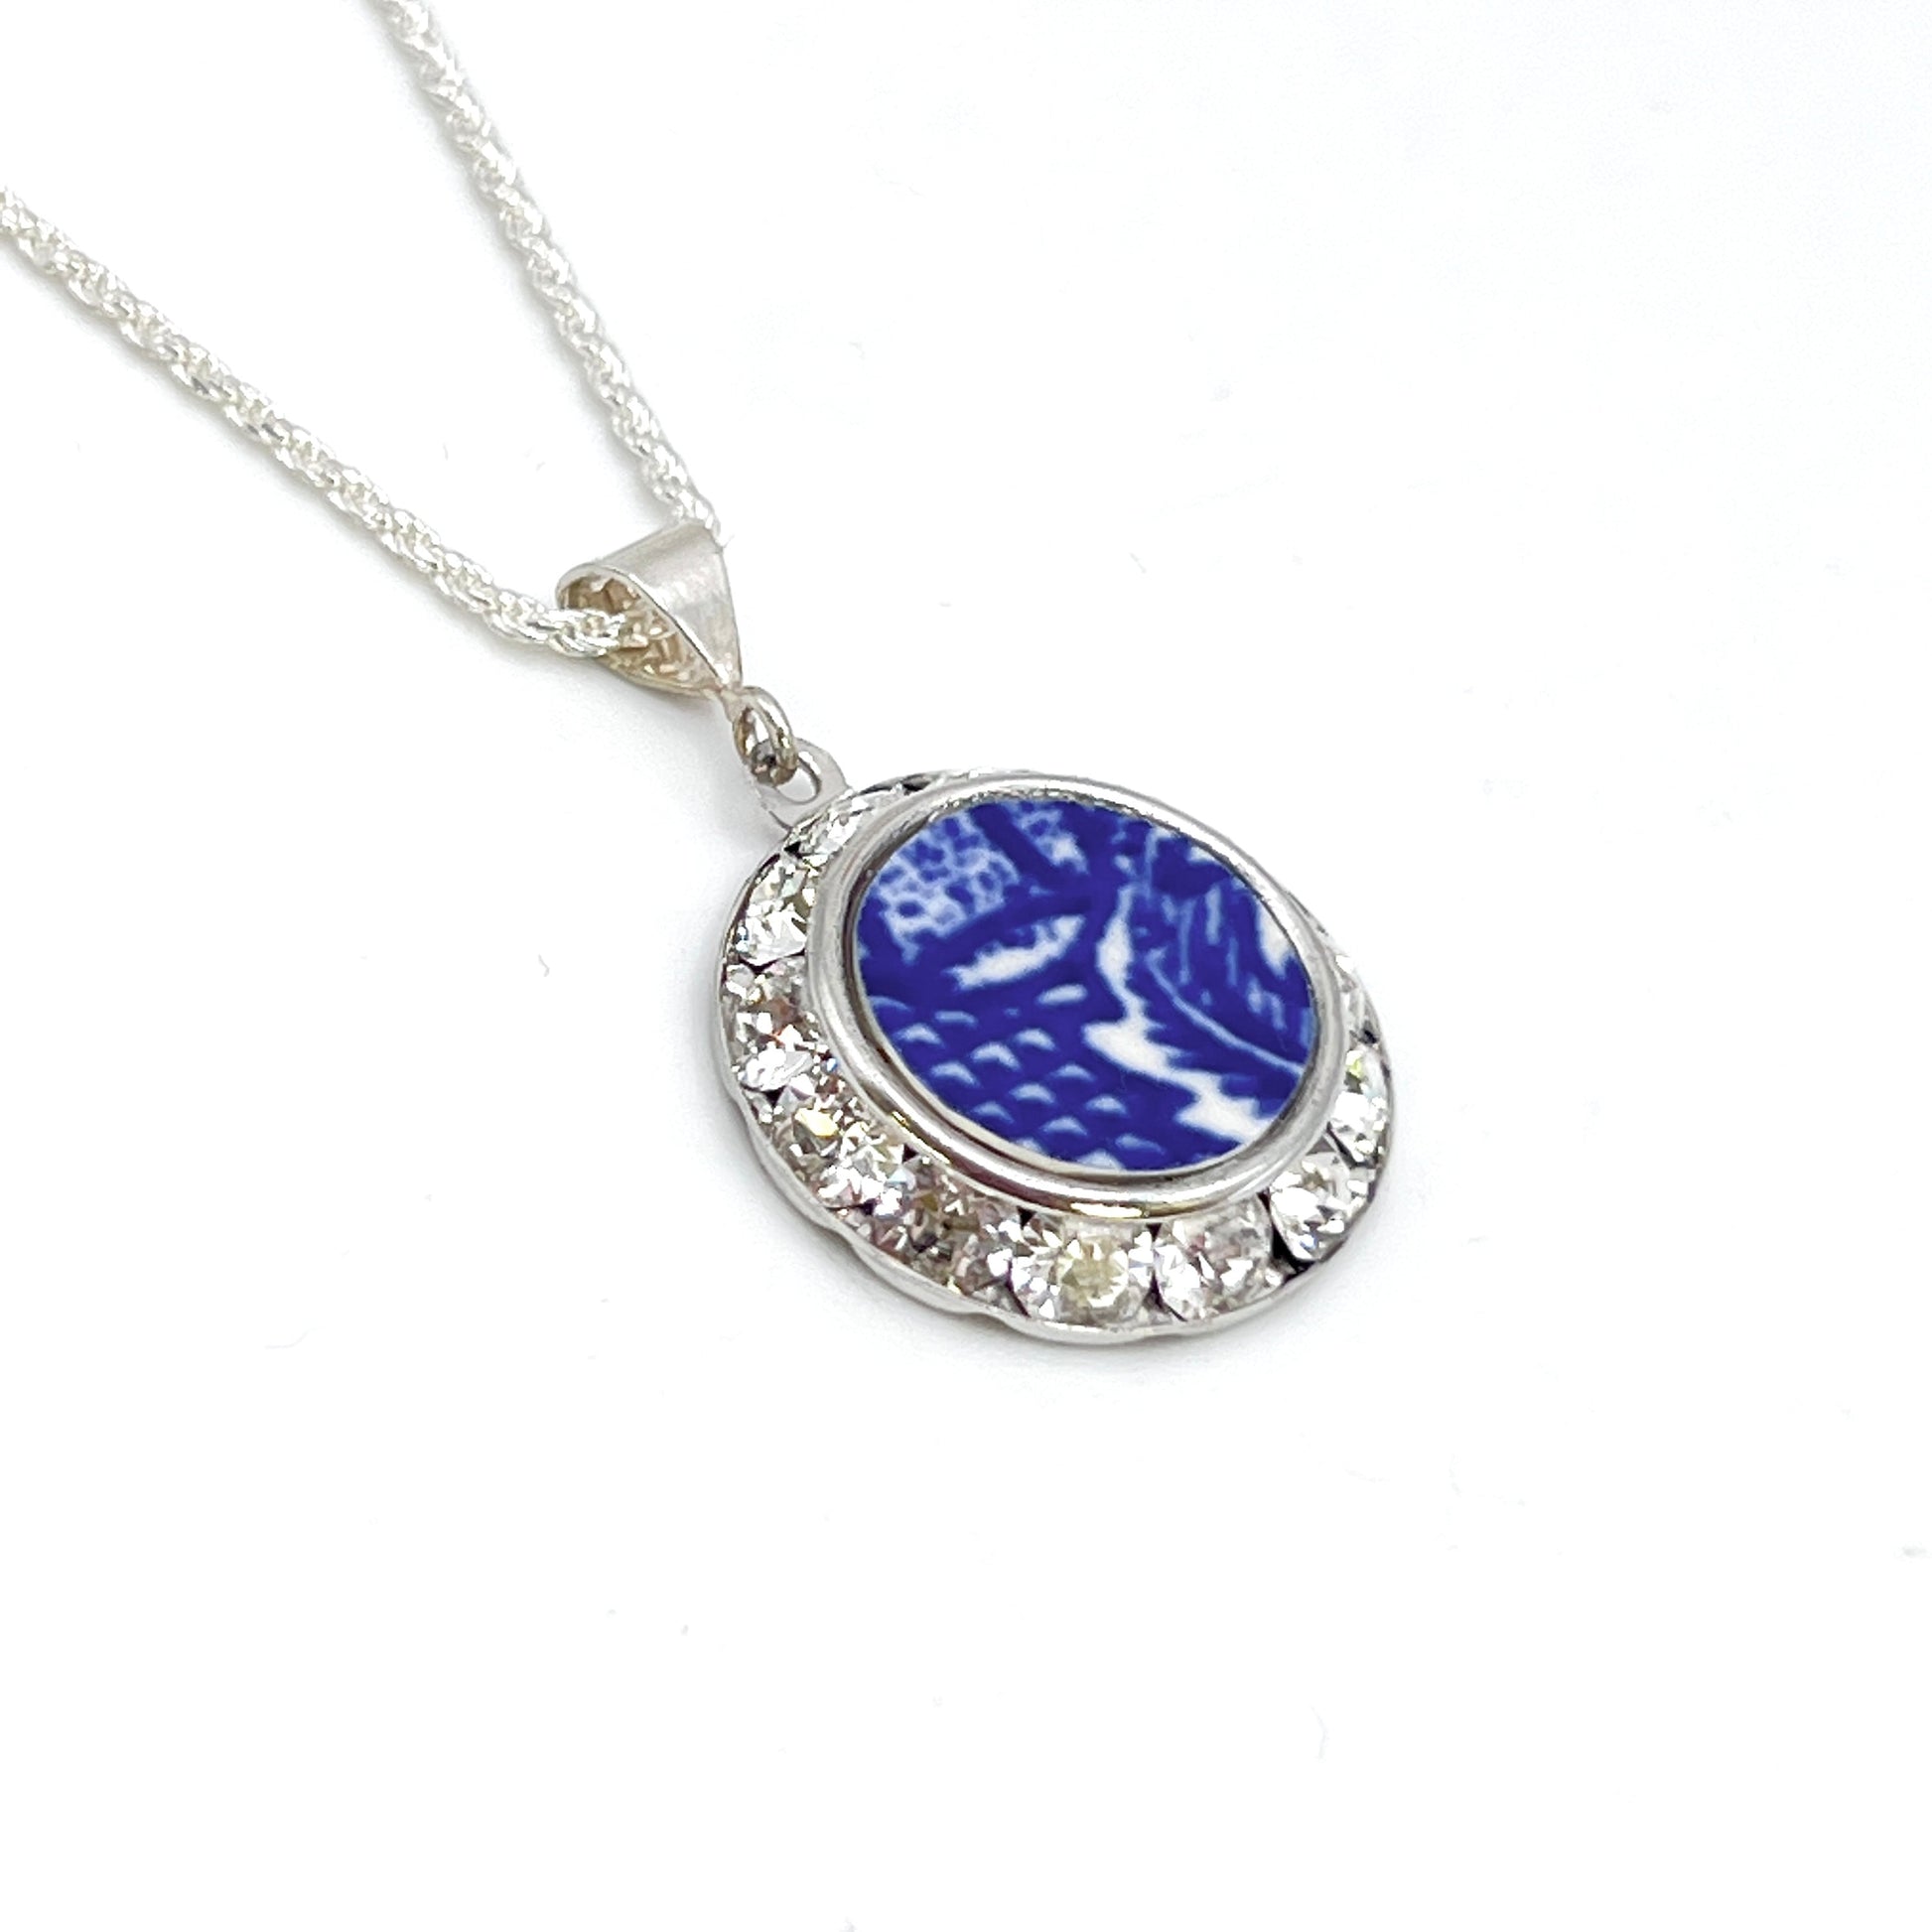 Blue Willow Necklace, Crystal Broken China Jewelry, One-of-a-Kind Unique 9th and 20th Anniversary Gifts for Wife, Gifts for Women